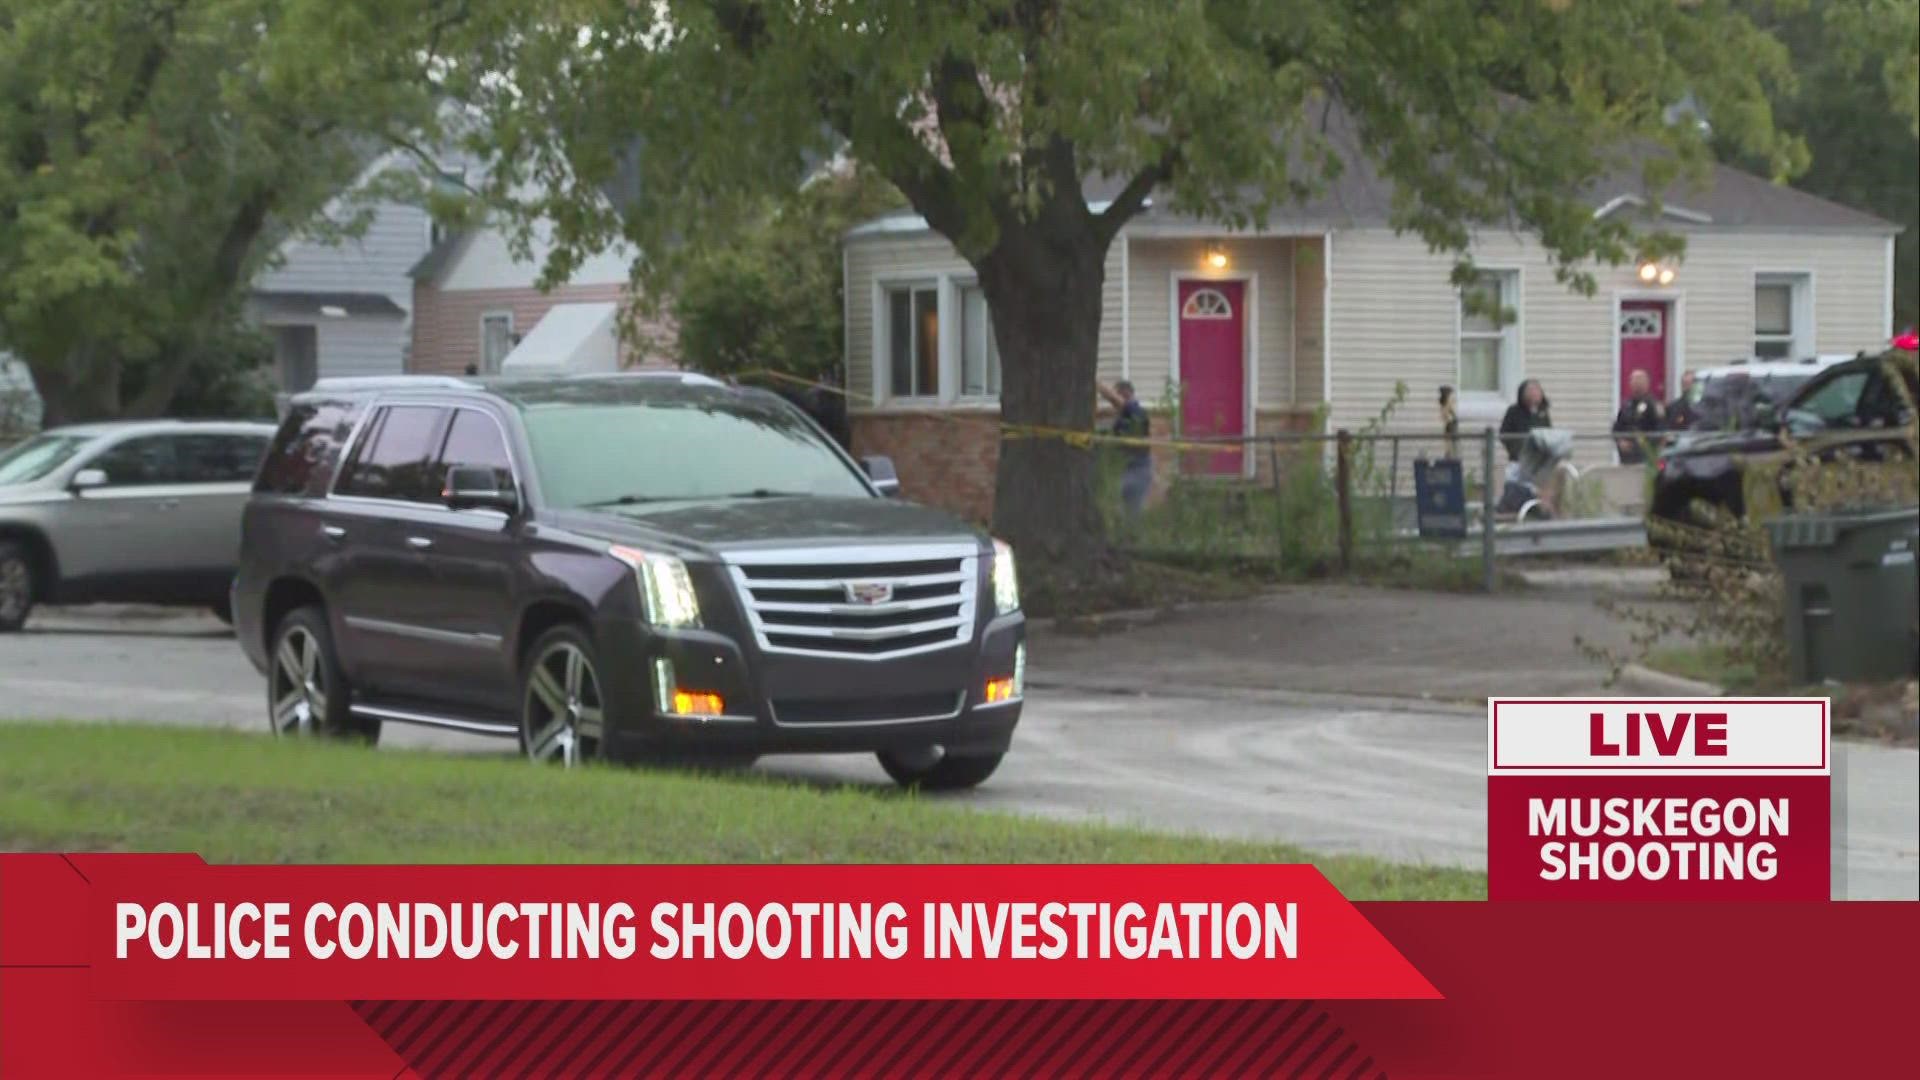 Authorities aren't sharing many details but did say they began investigating a shooting Thursday afternoon.